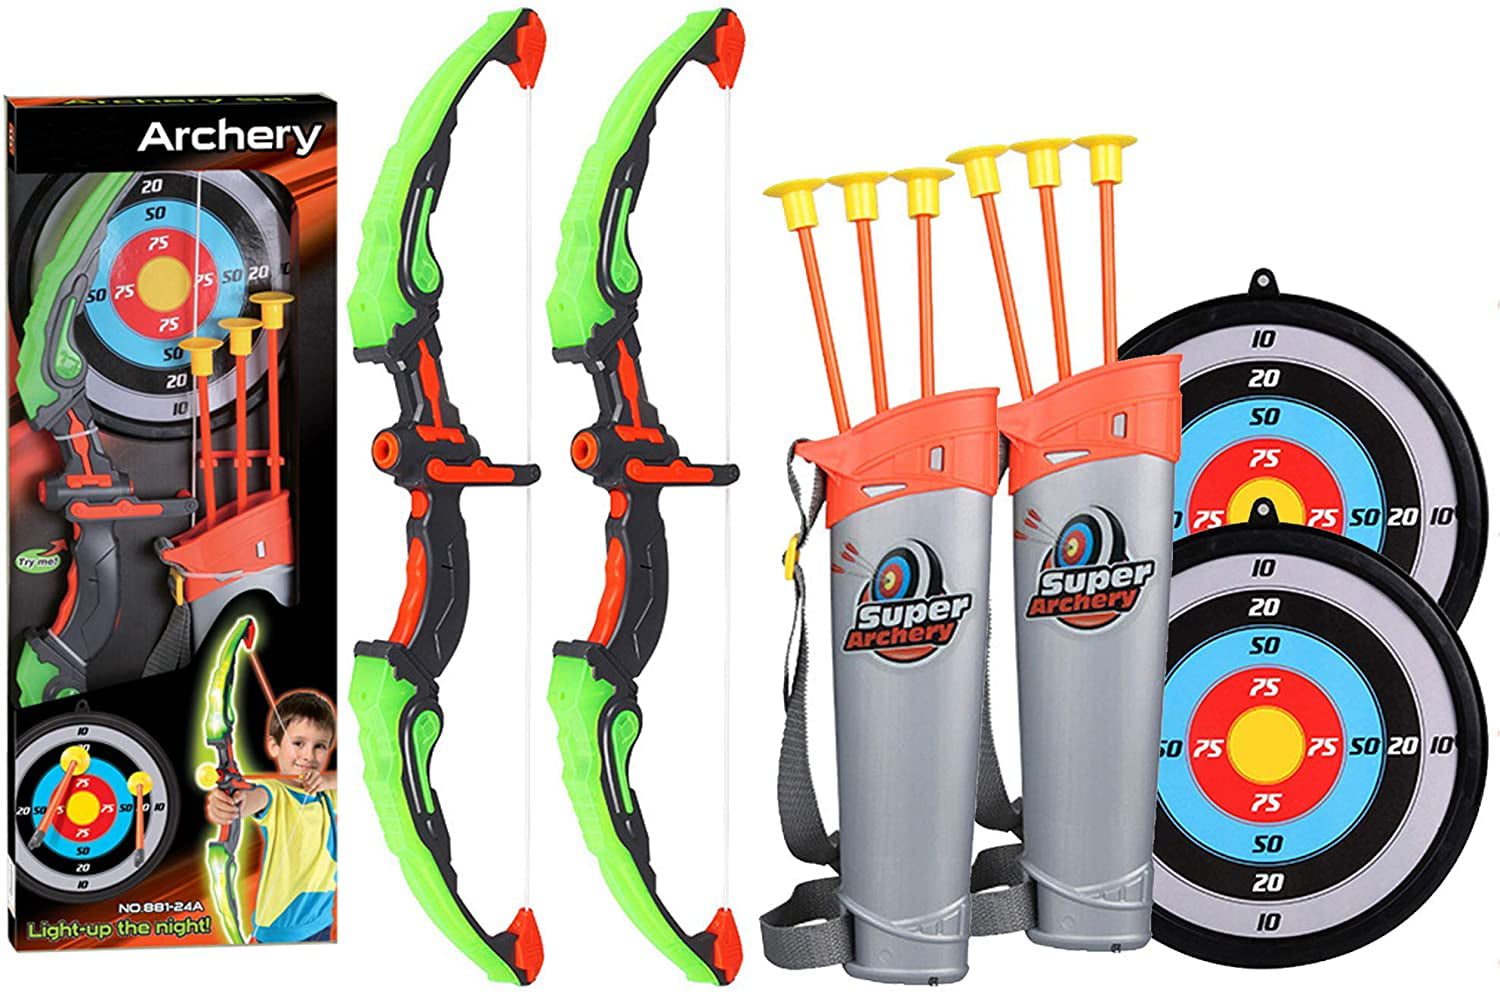 Traditional Wooden Bow Arrow Set Outdoor Toys Games XMAS Gifts Kids Archery Set 